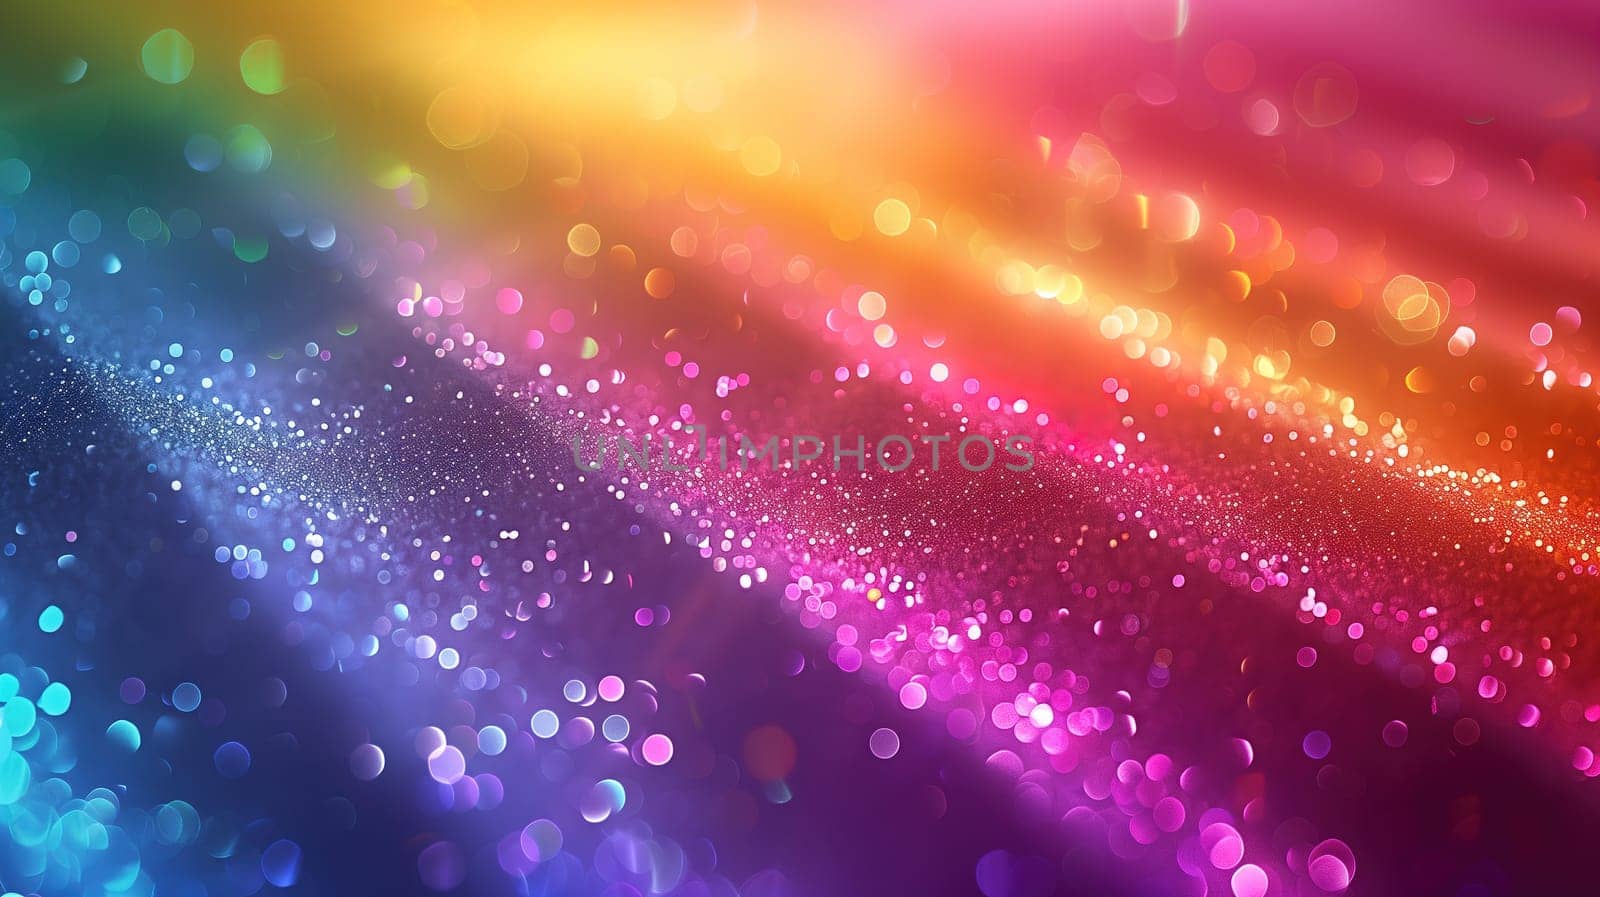 A vibrant rainbow colored background with an abundance of bubbles floating throughout. The bubbles vary in size and color, creating a playful and colorful atmosphere.